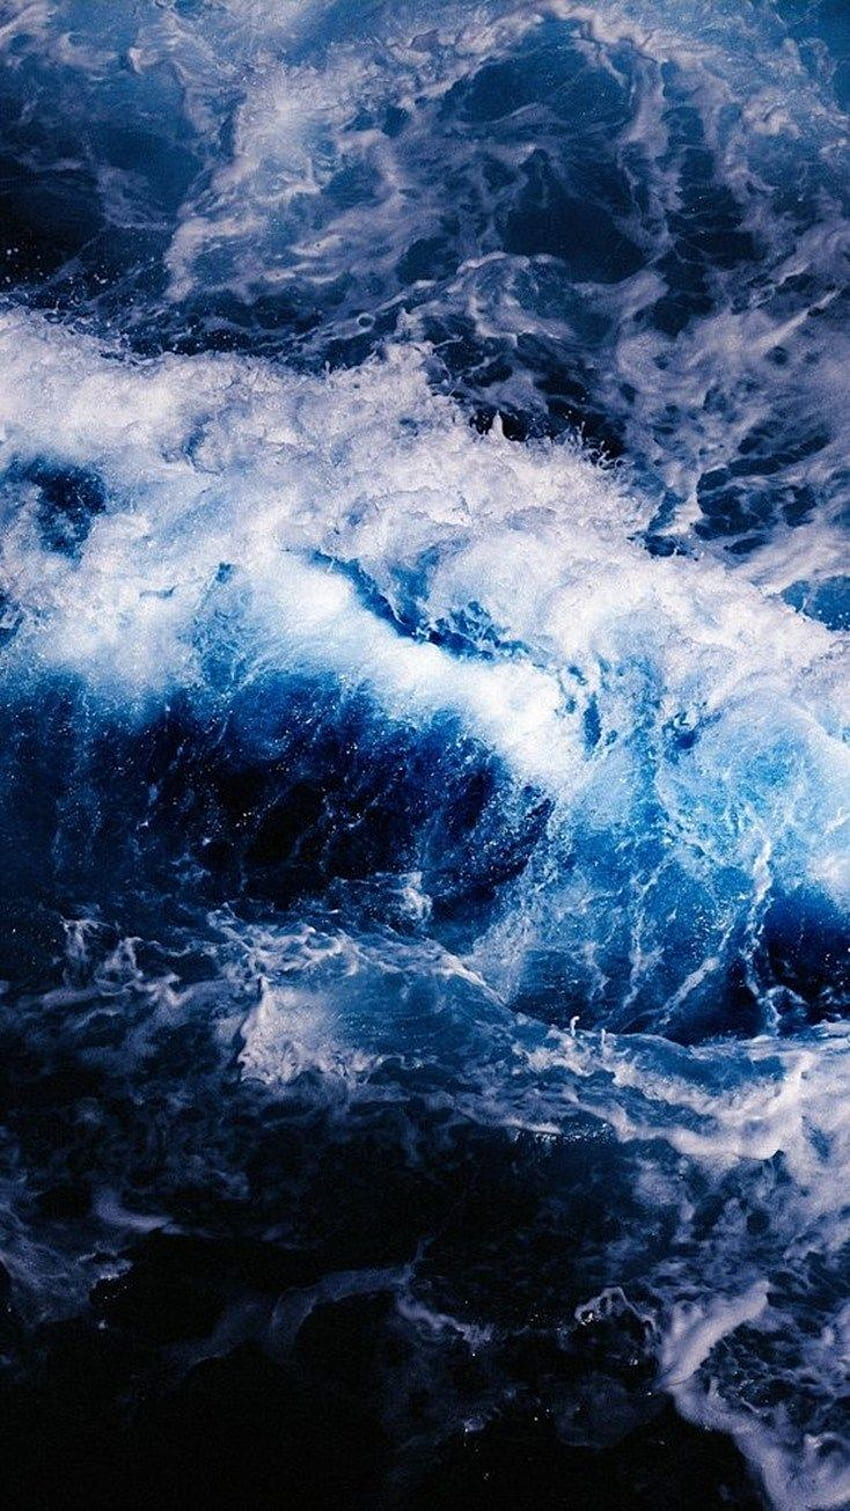 A close up of the ocean with waves - Ocean